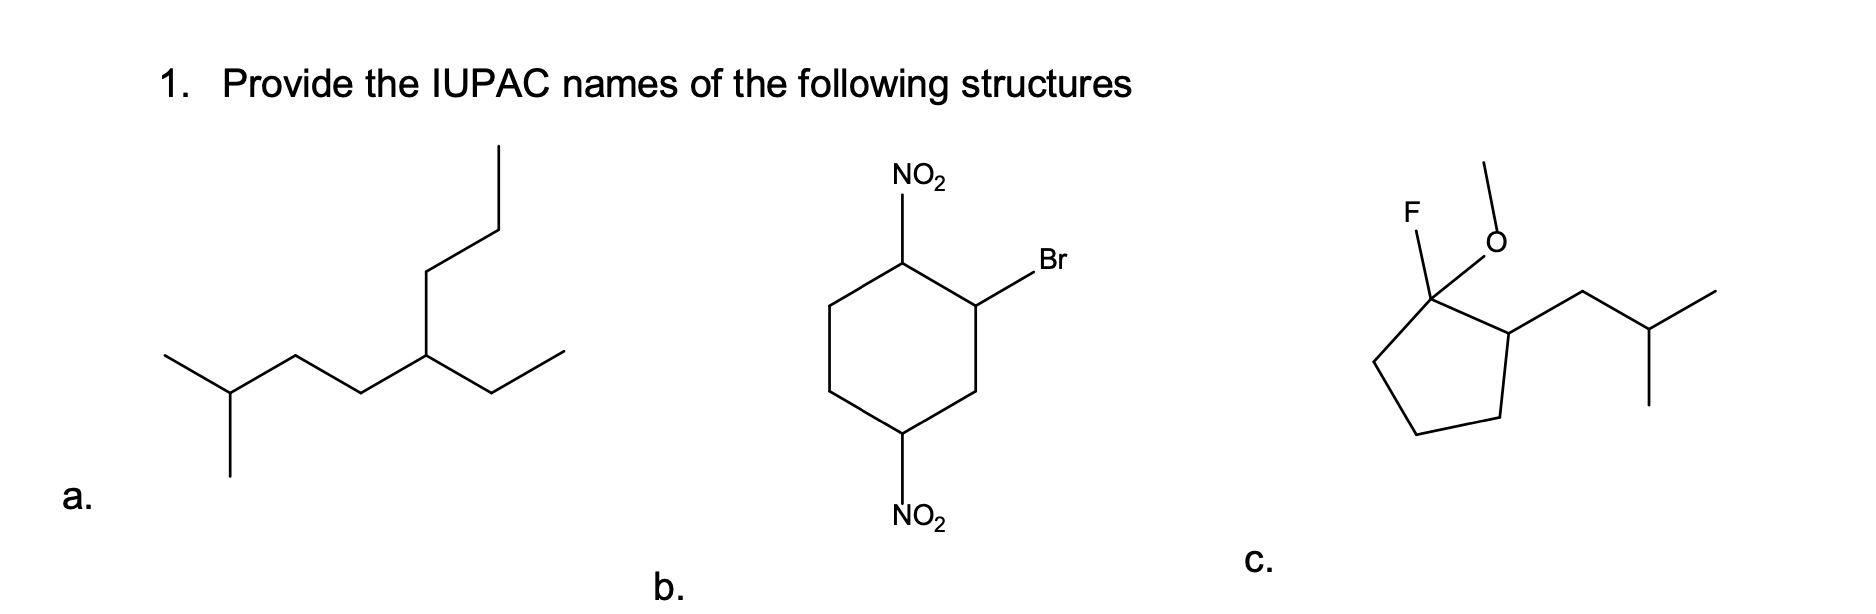 1. Provide the IUPAC names of the following structures
NO2
Br
NO2
C.
b.
